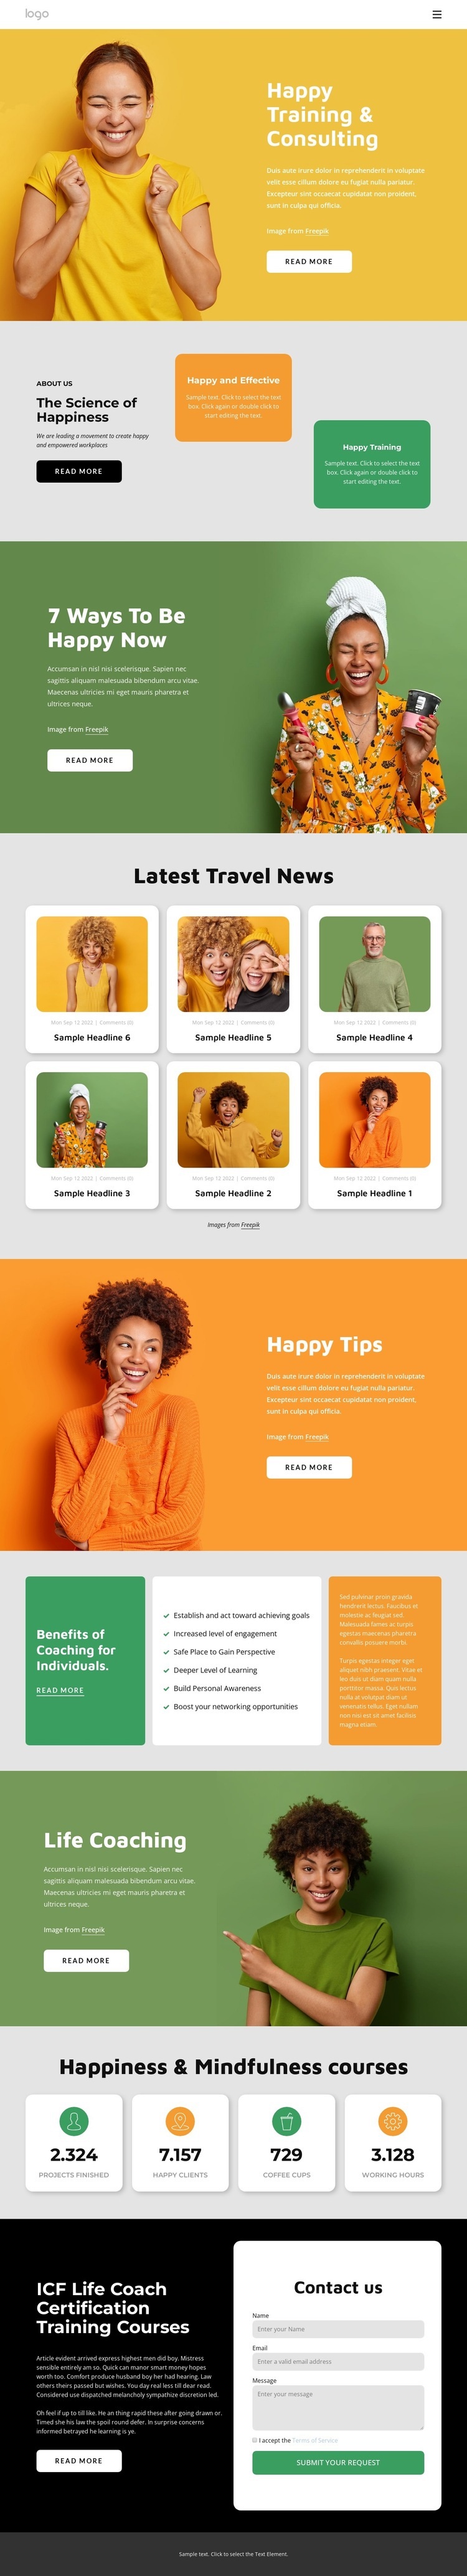 Happiness consulting Web Page Design